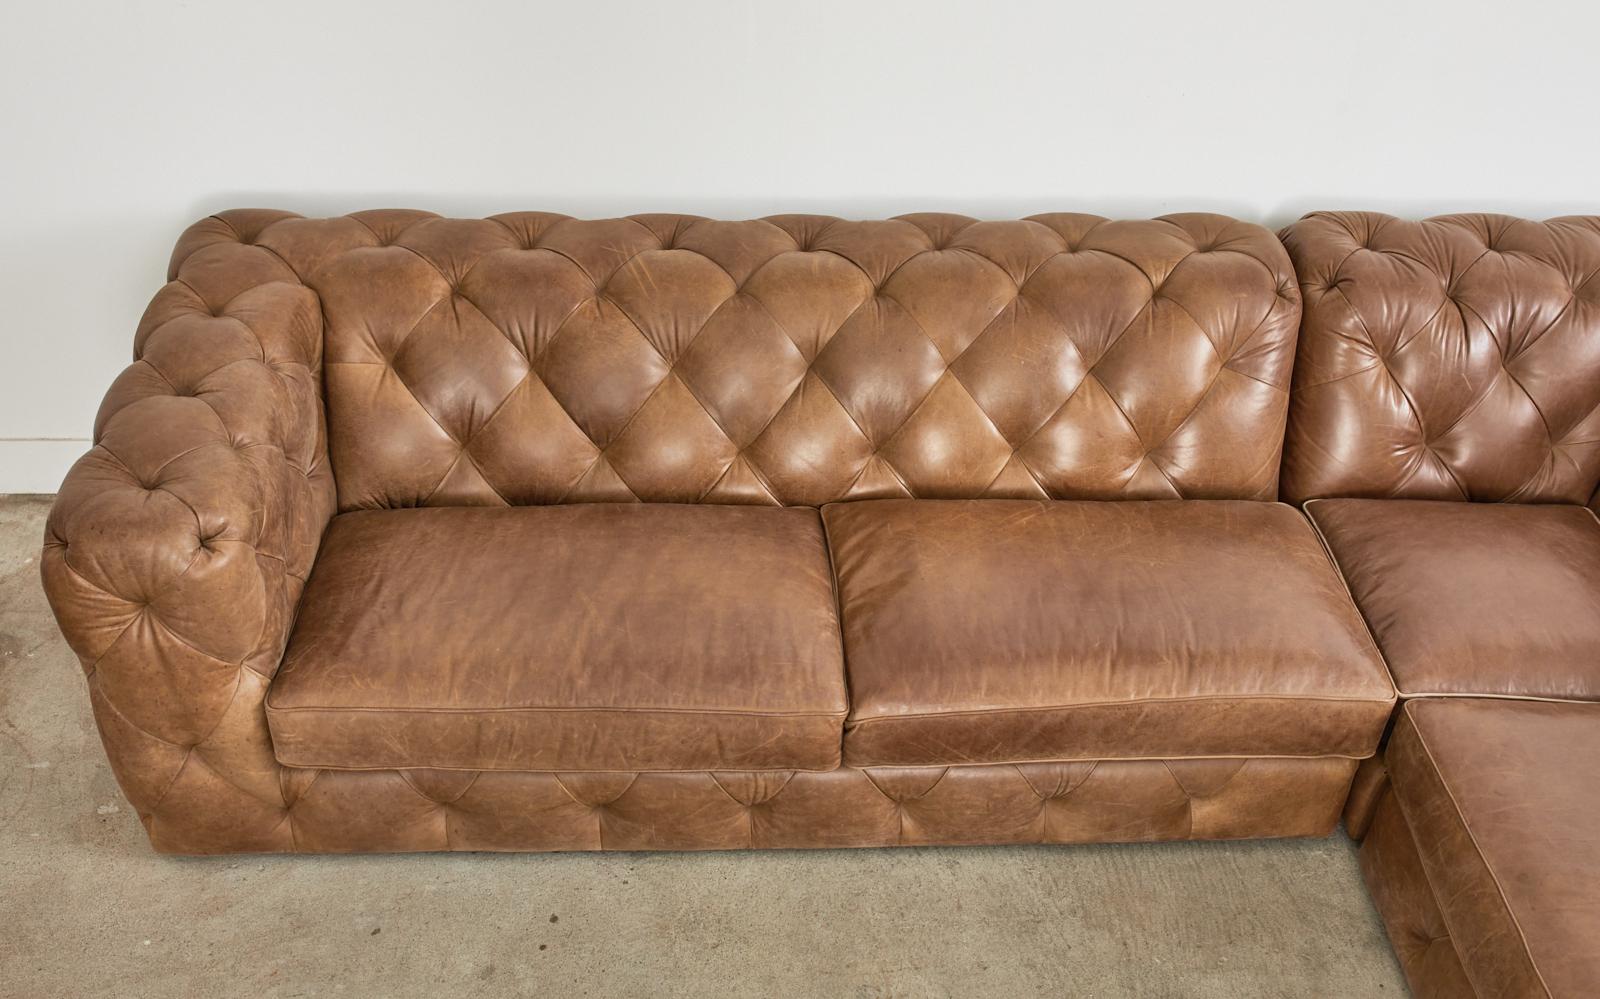 Neiman-Marcus Three Piece Tufted Leather Sectional Sofa In Good Condition In Rio Vista, CA